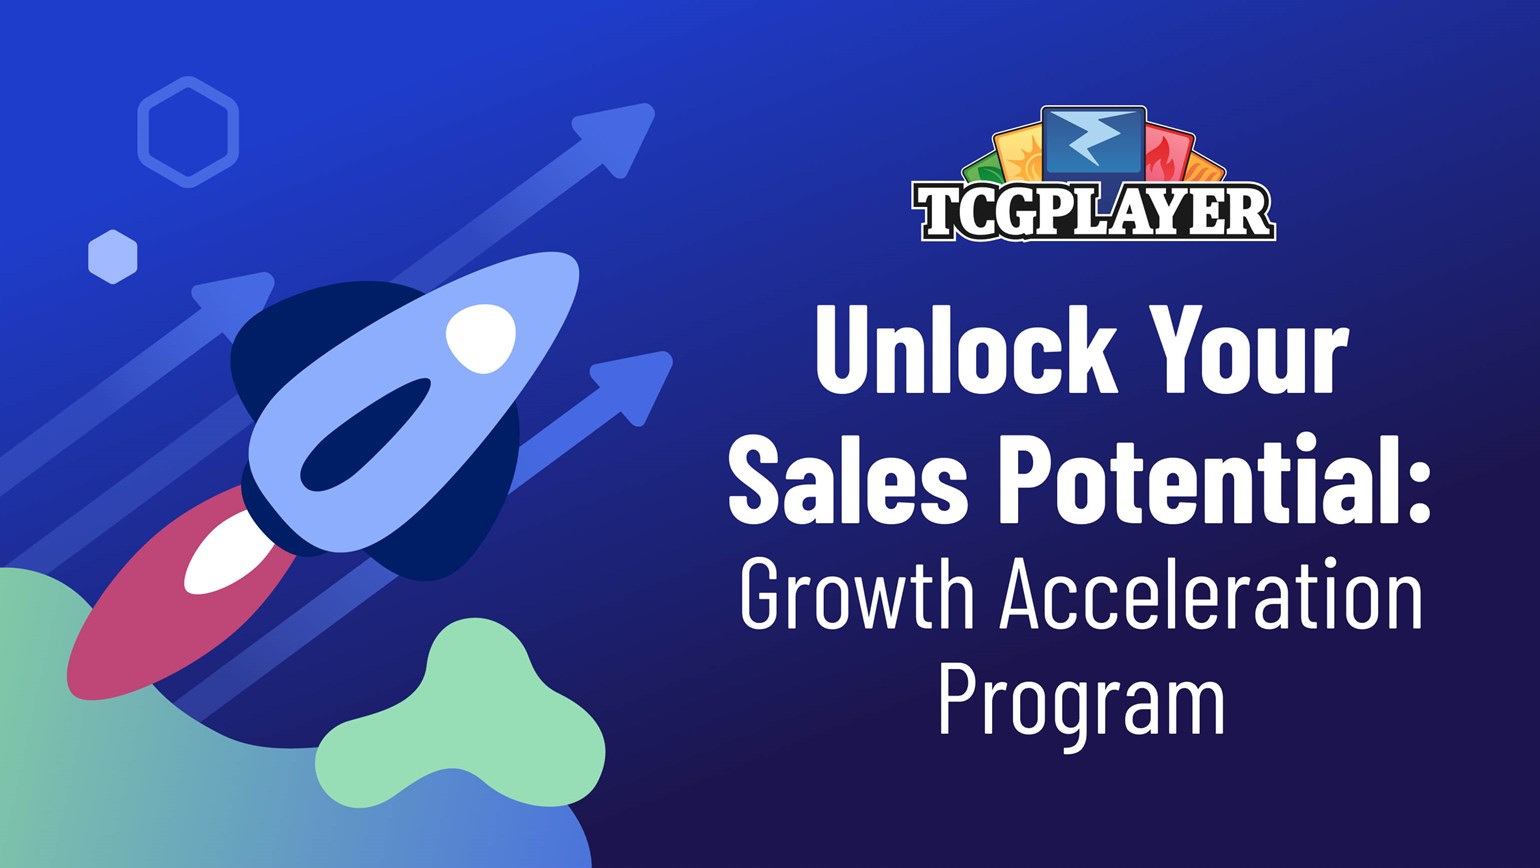 Unlock Your Sales Potential: The Growth Acceleration Program